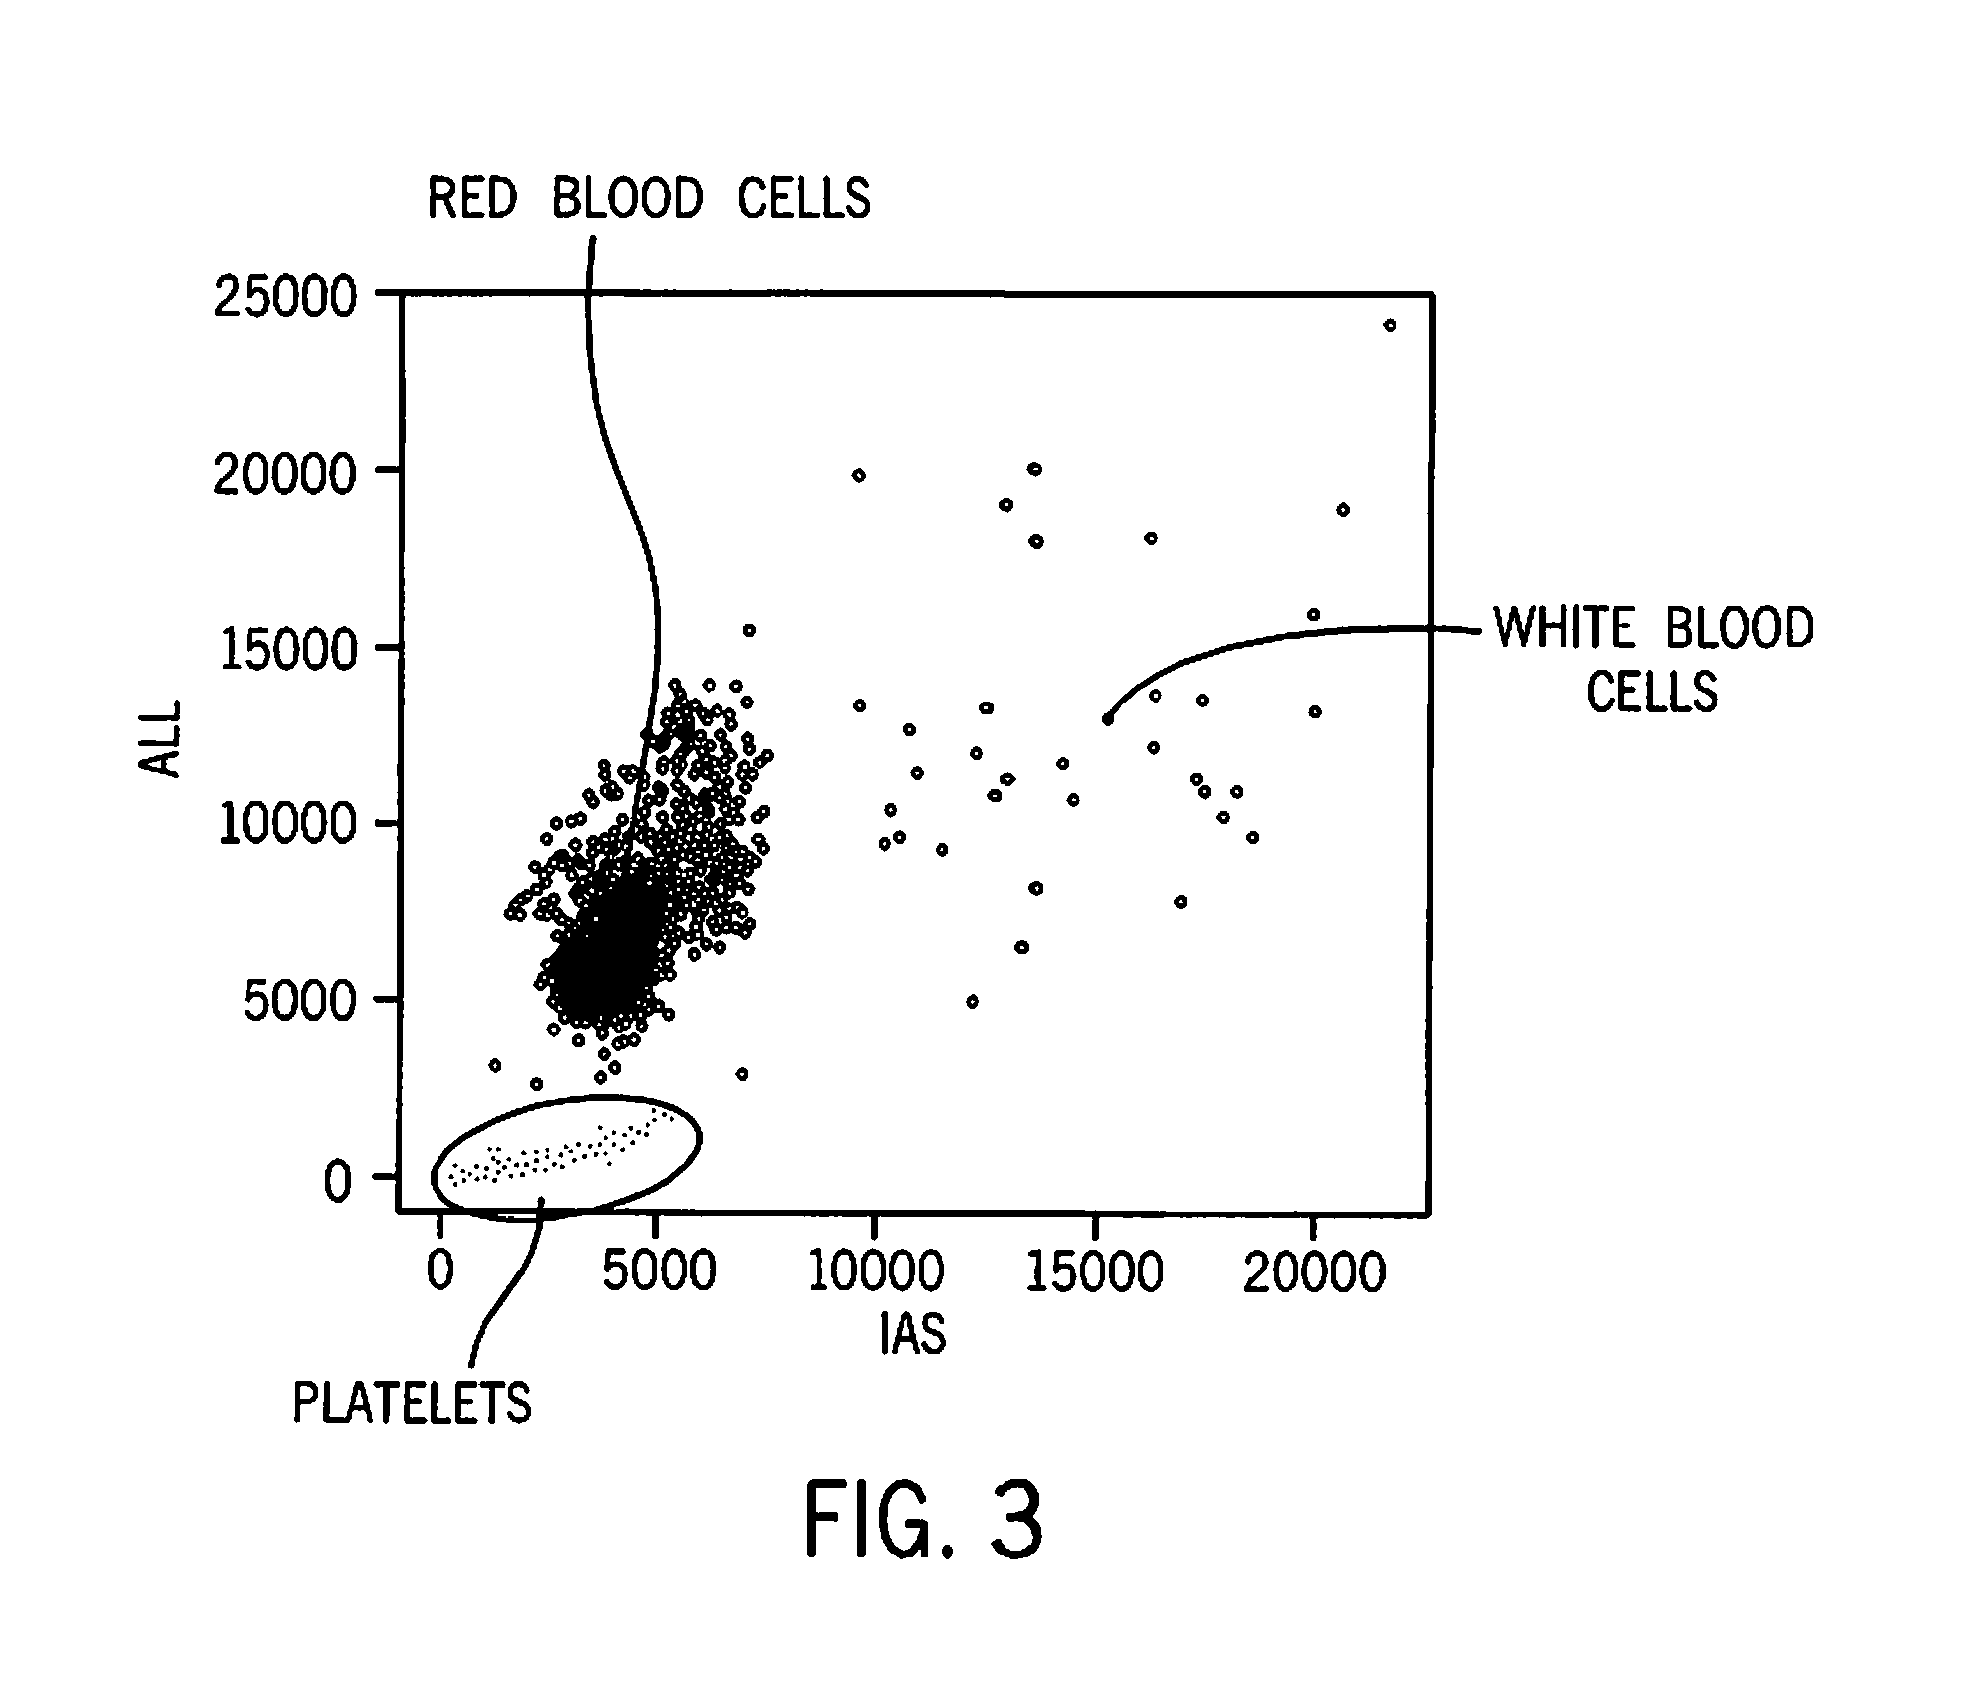 Method for discriminating red blood cells from white blood cells by using forward scattering from a laser in an automated hematology analyzer